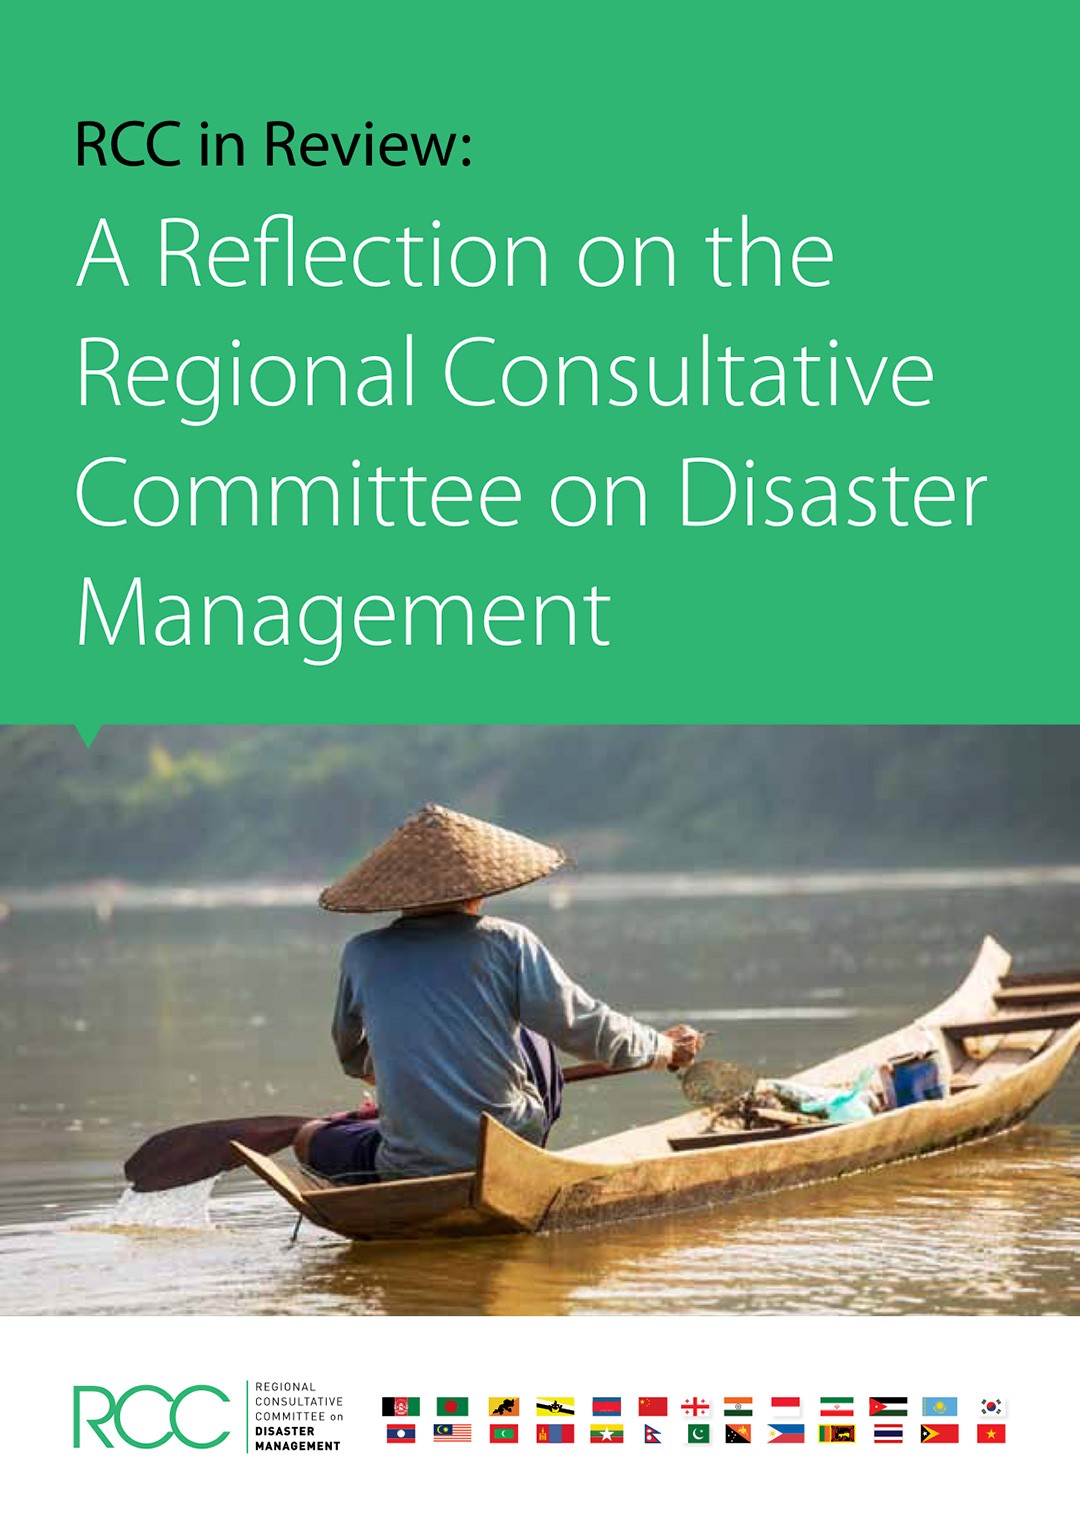 RCC in Review: A Reflection on the Regional Consultative Committee on Disaster Management